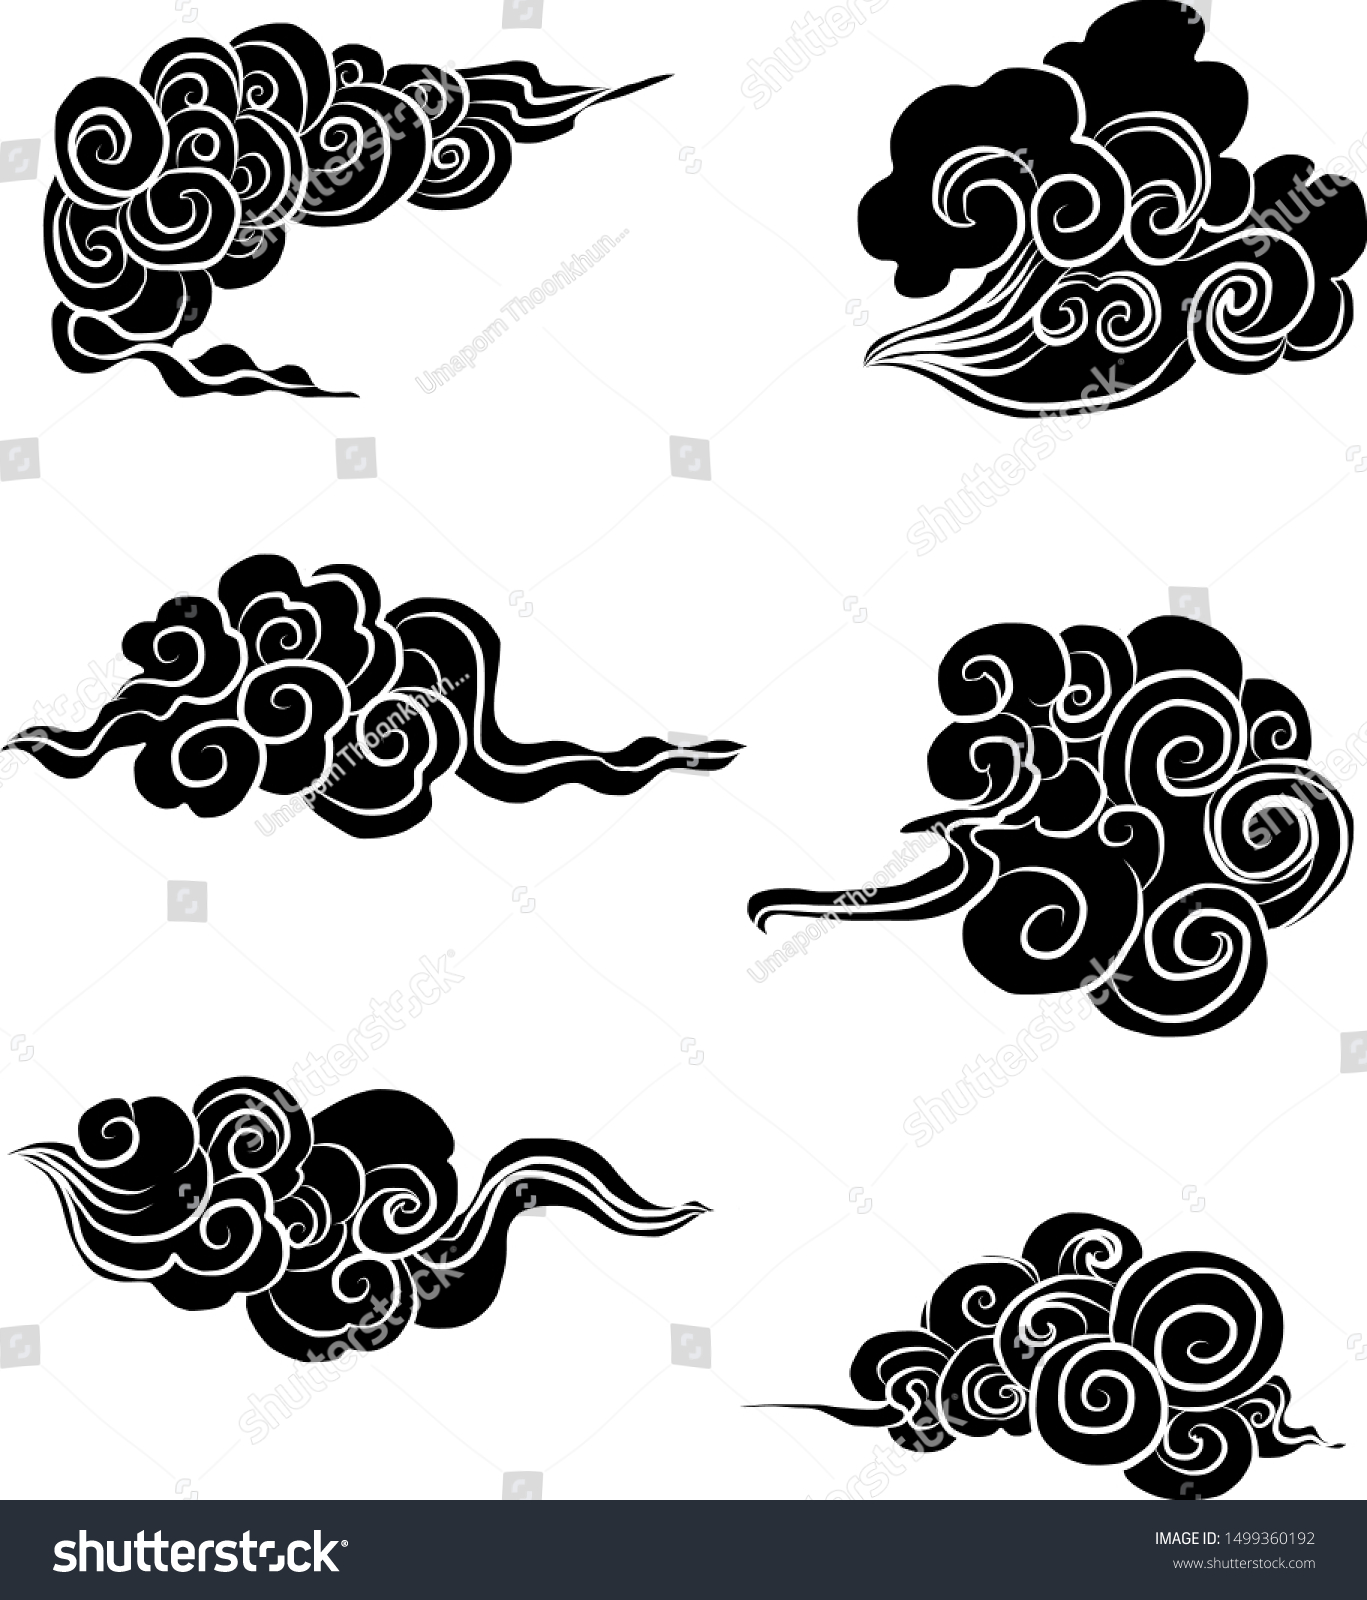 traditional-japanese-clouds-vector-tattoo-embroiderychinese-stock-vector-royalty-free-1499360192-shutterstock